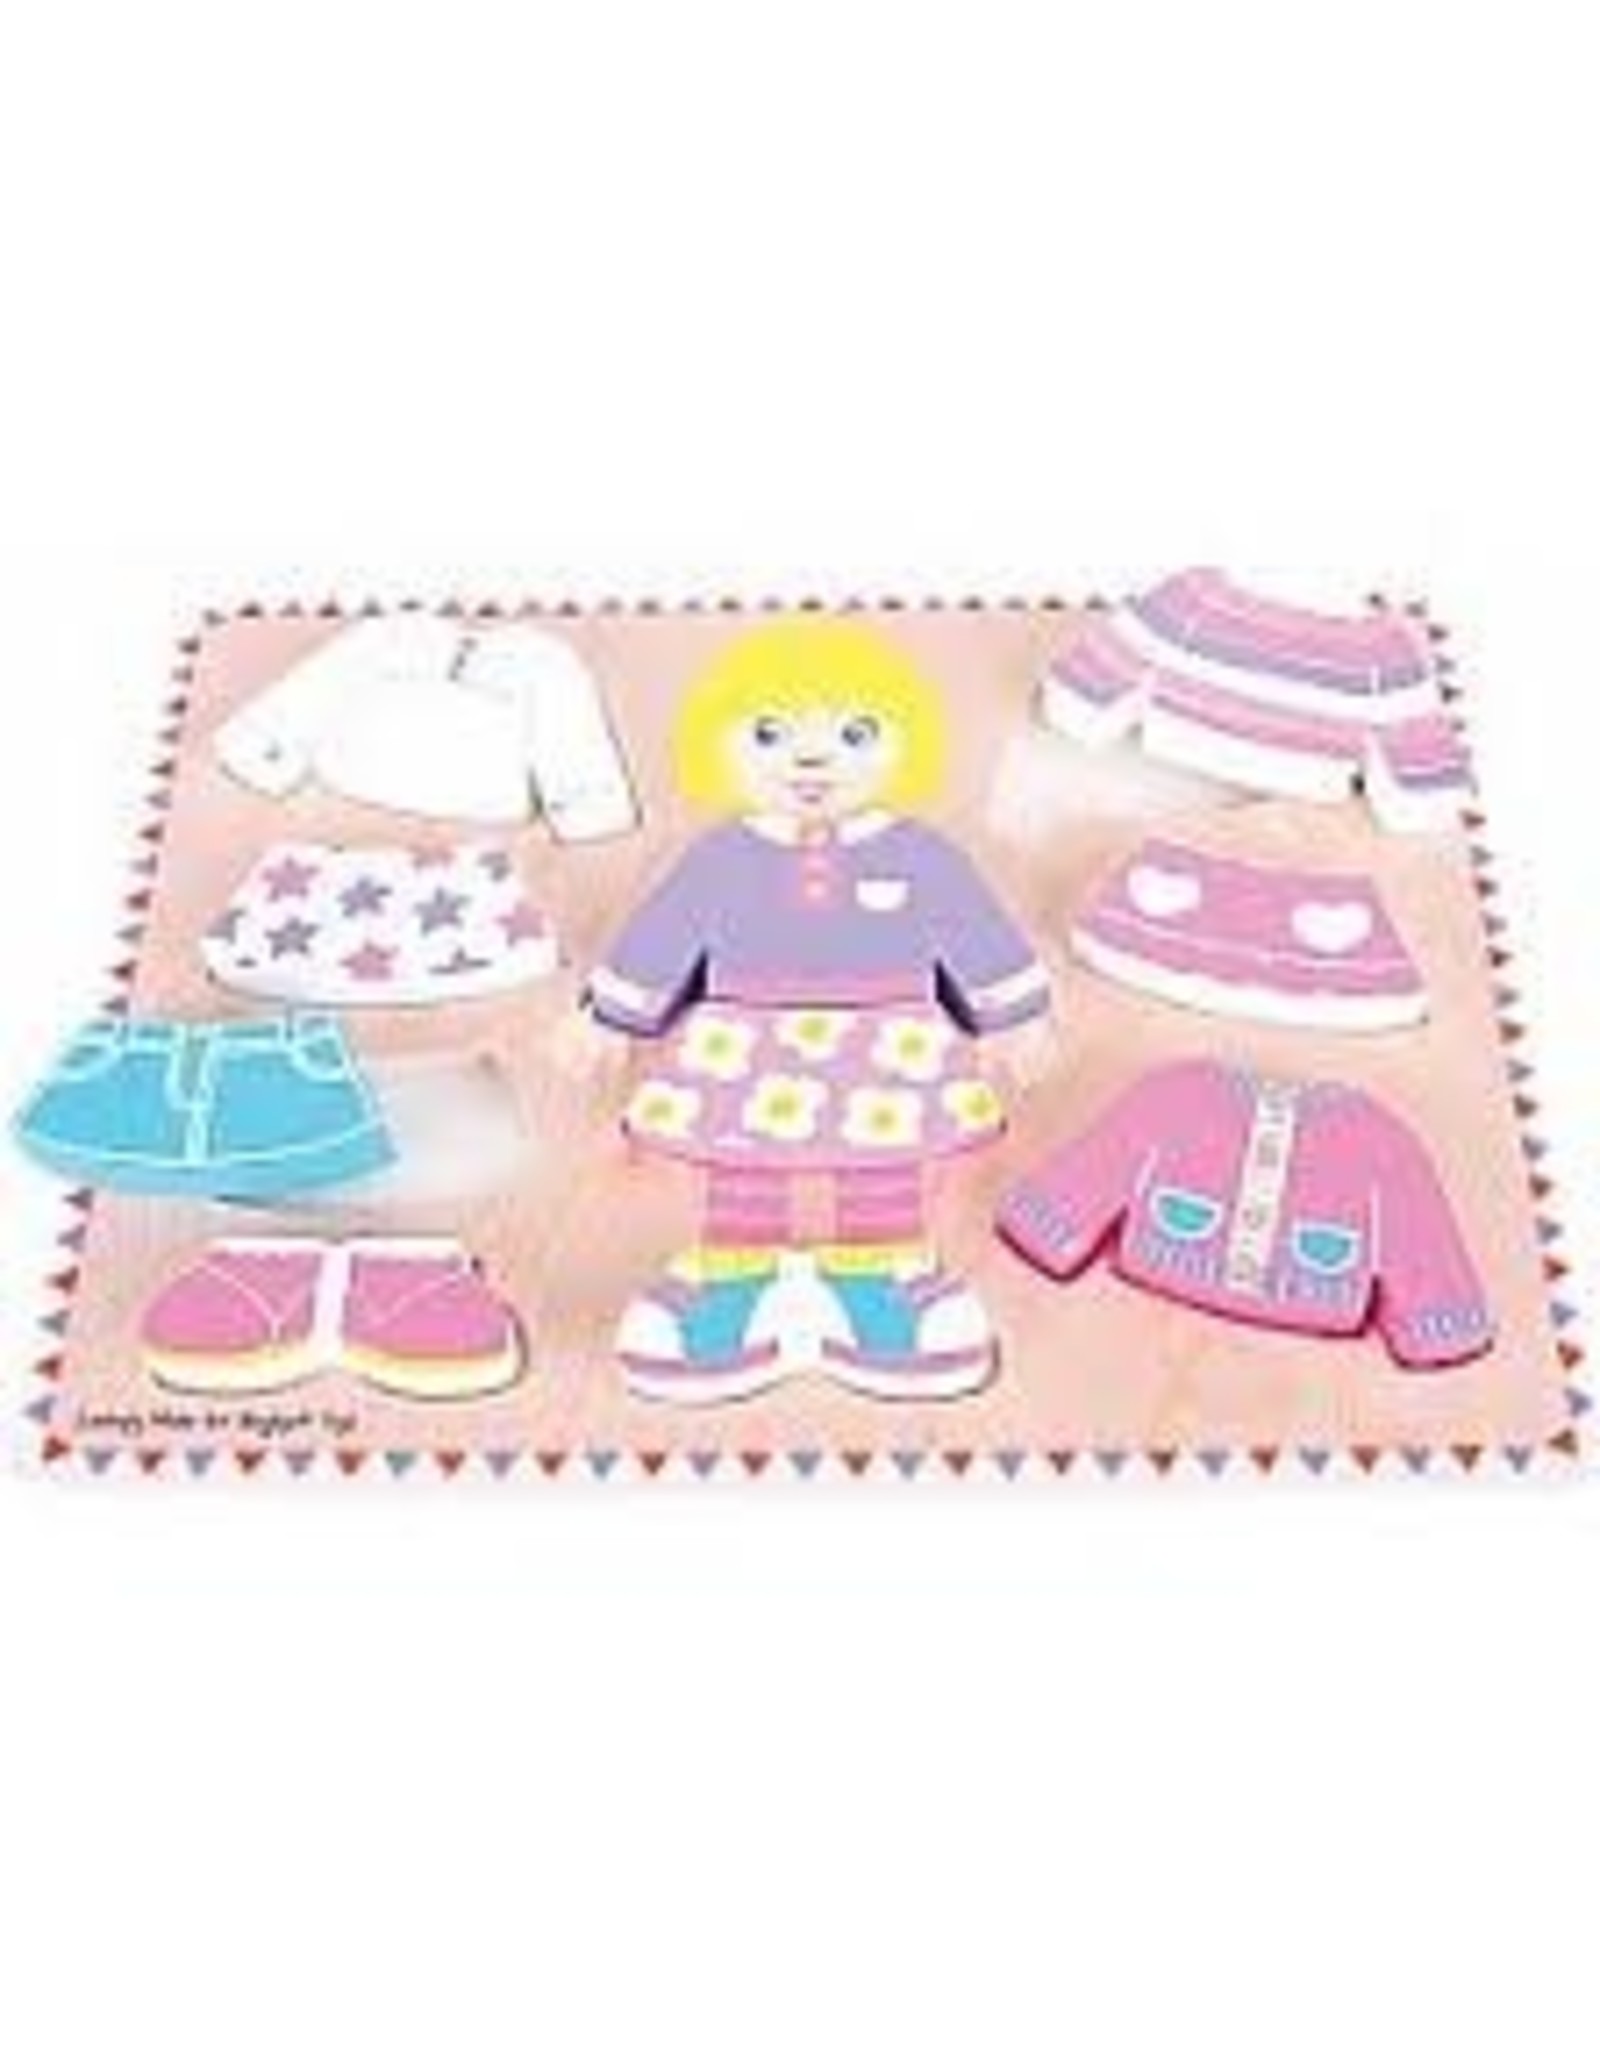 Dressing Girl Wooden Puzzle